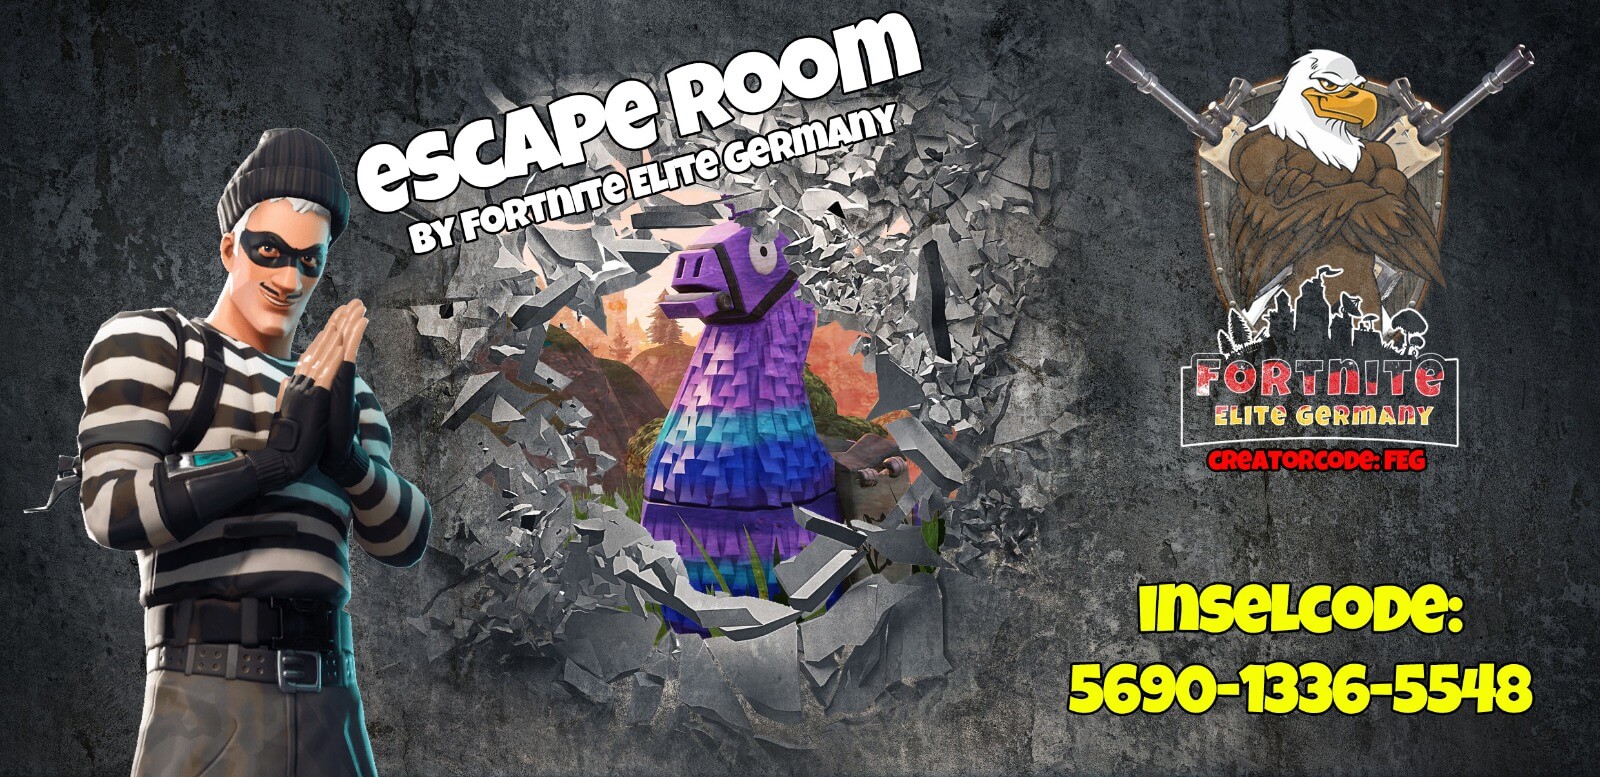 ESCAPE ROOM BY FORTNITE ELITE GERMANY image 2